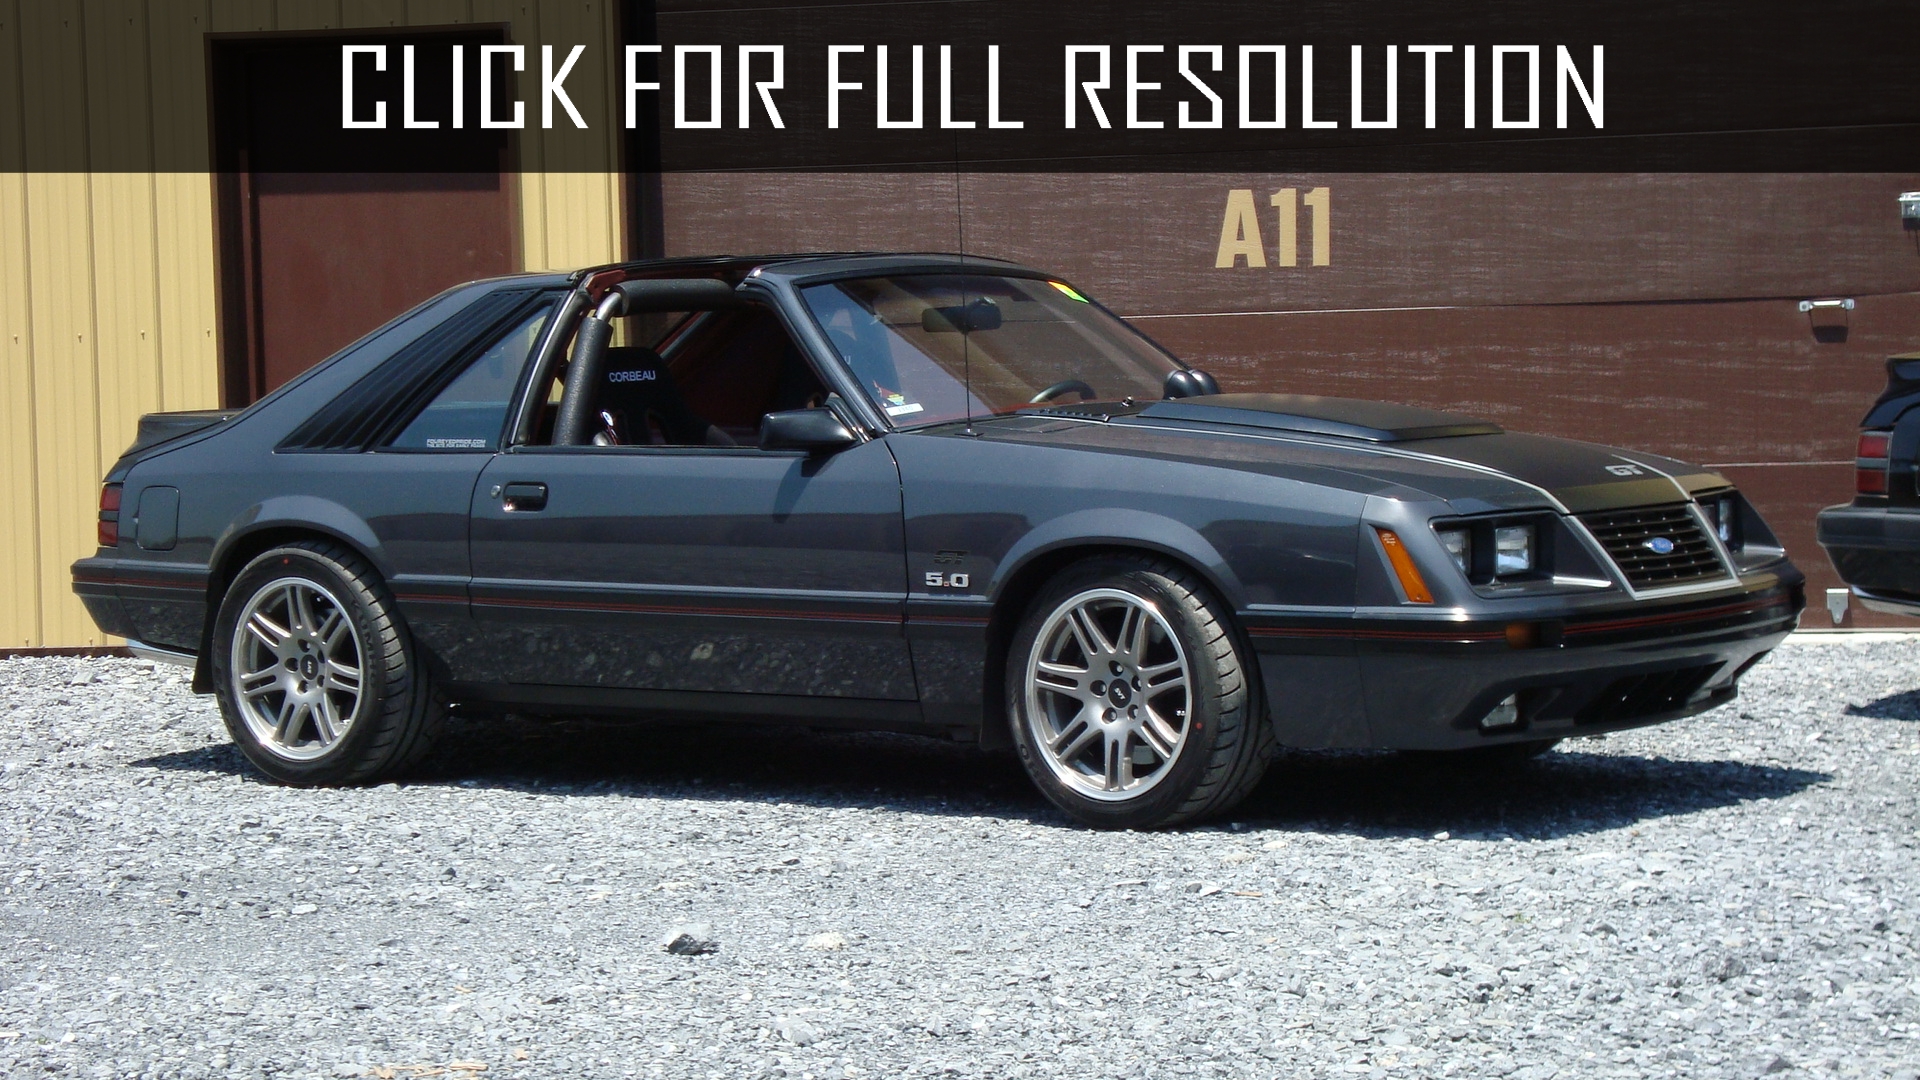 1984 Ford Mustang Best Image Gallery 6 12 Share And Download